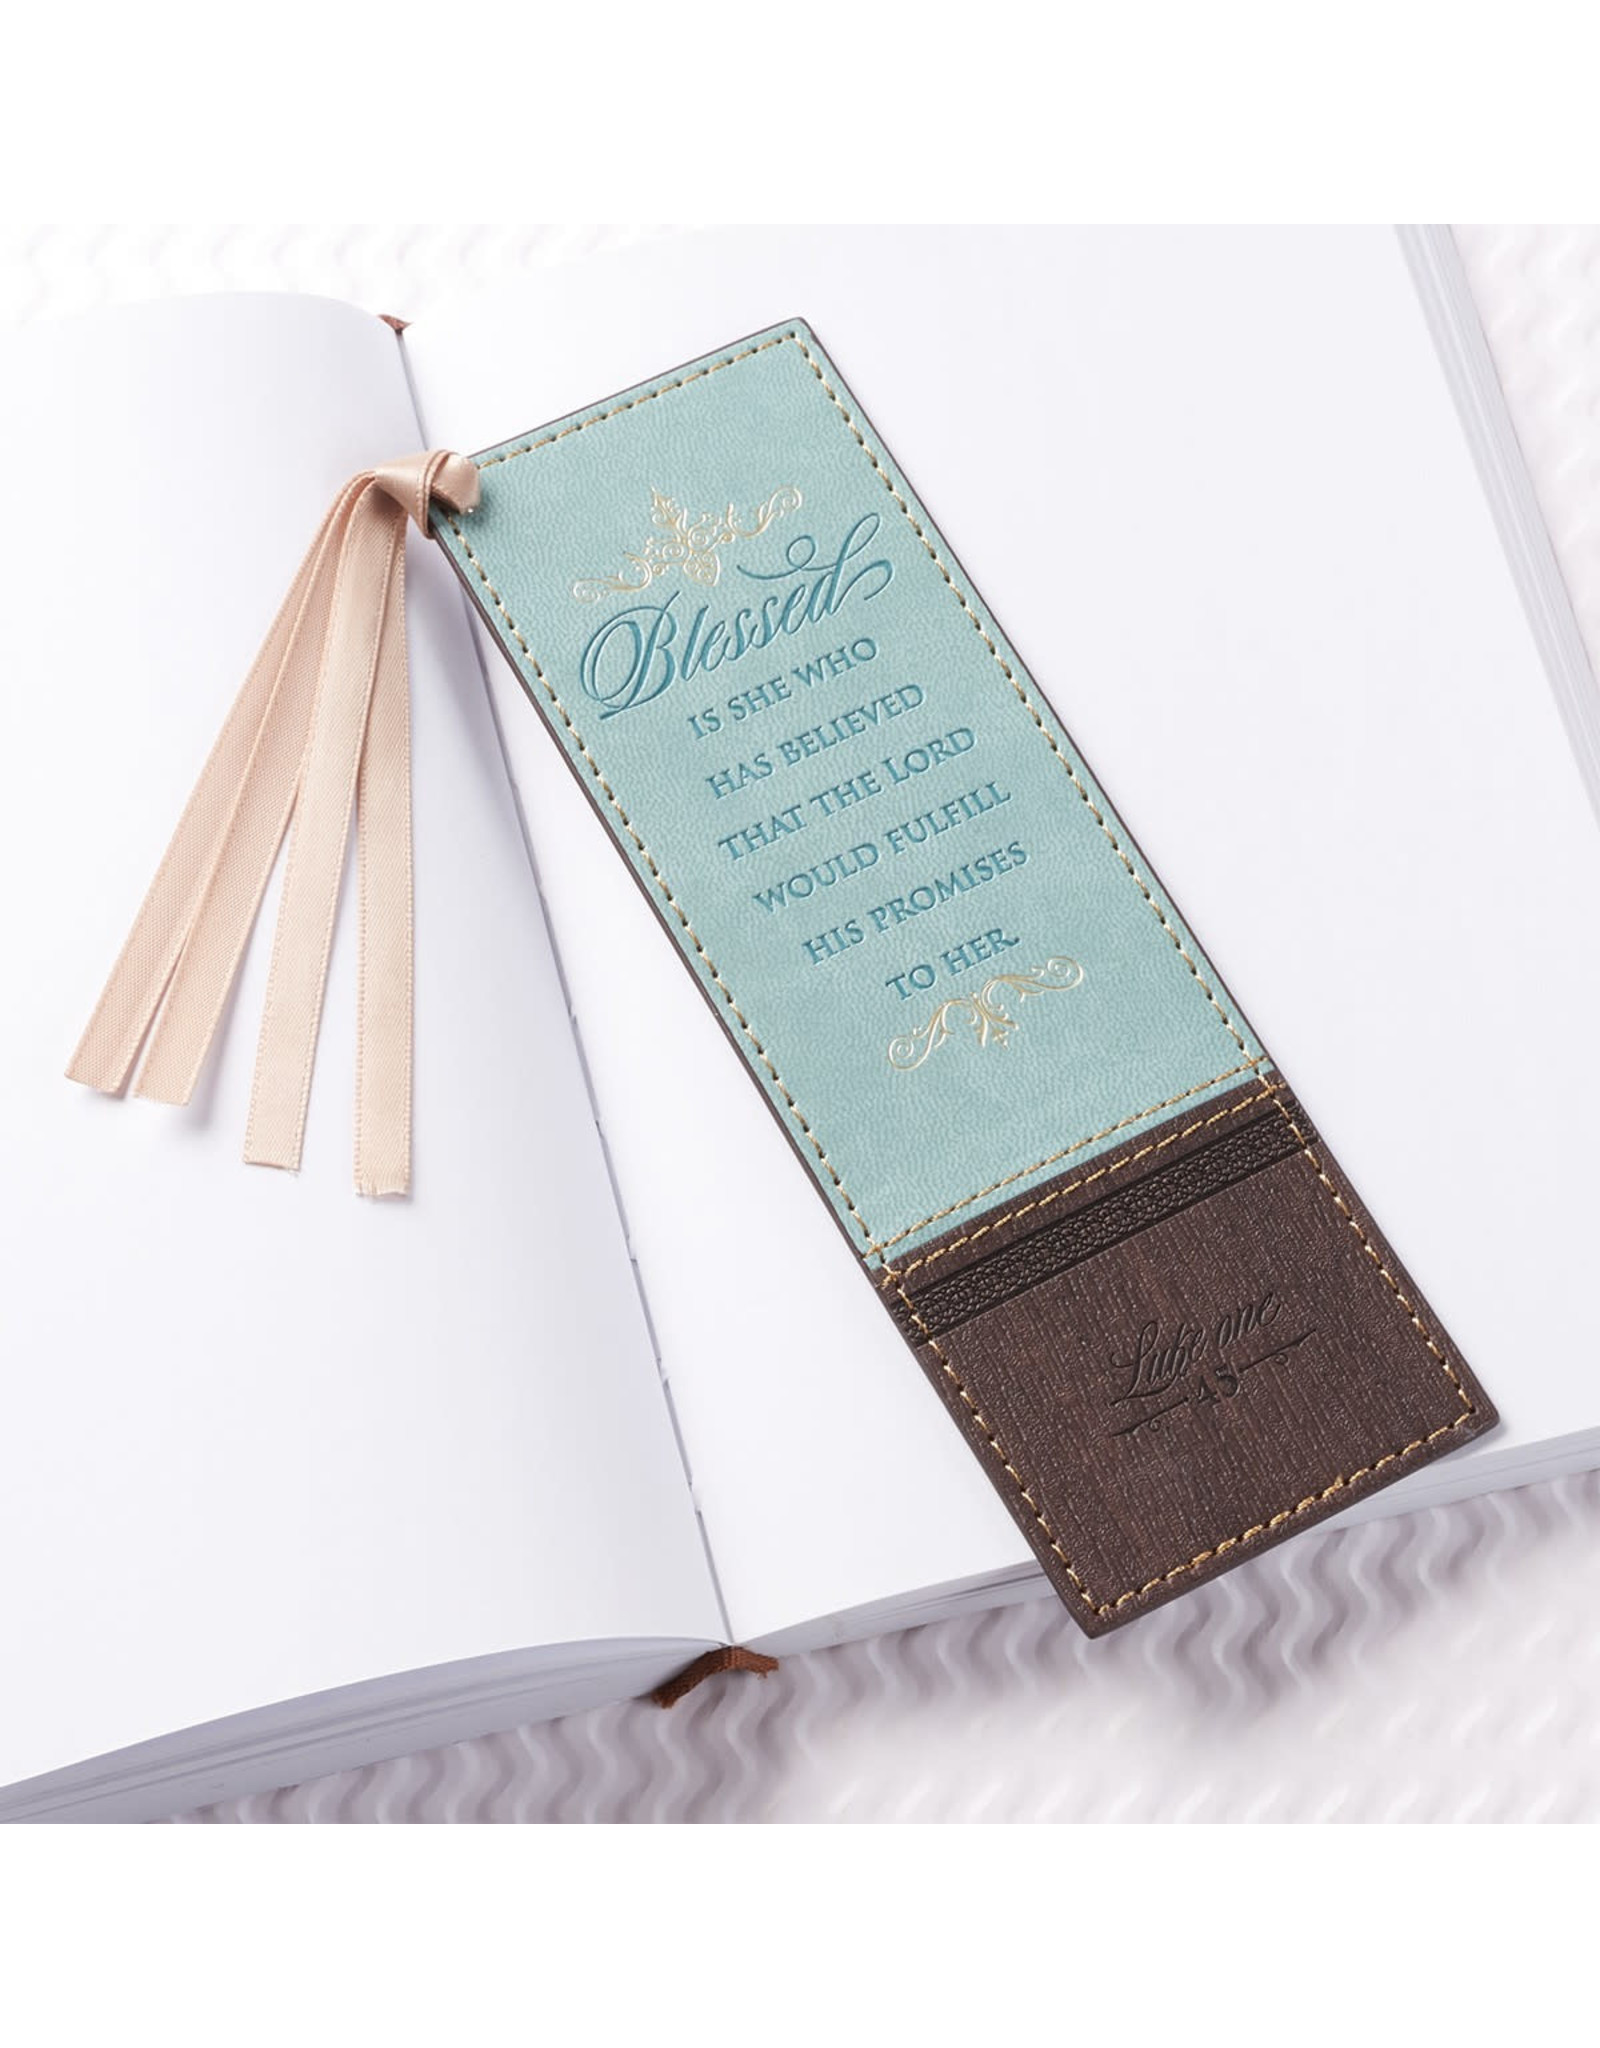 Christian Art Gifts Bookmark - Blessed Is She Who Has Believed